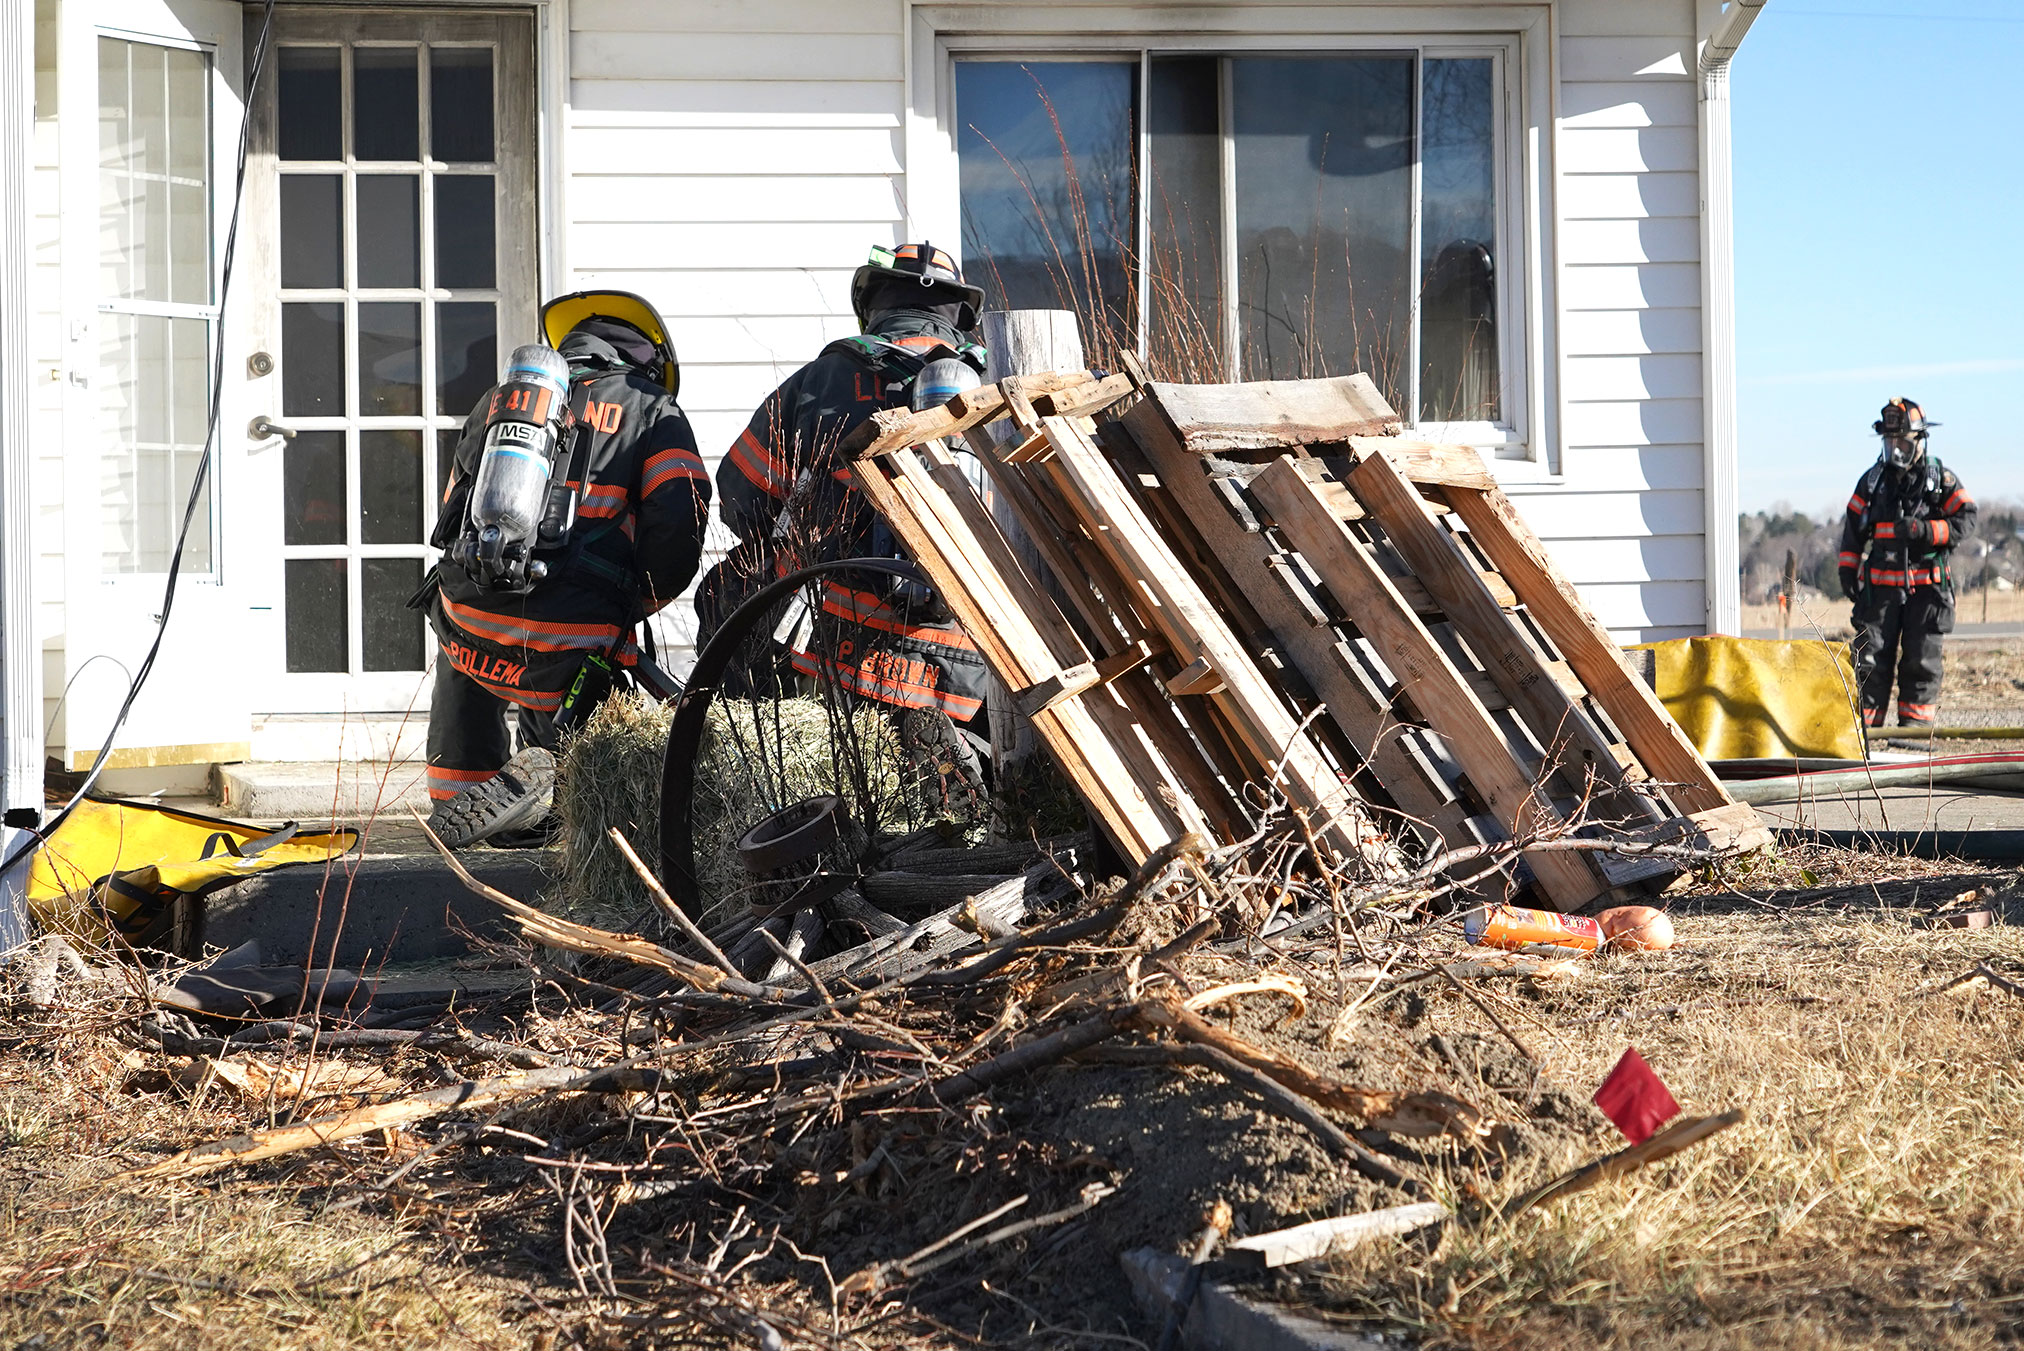 Featured image for “Loveland Fire Rescue Authority flow path management training exercise”